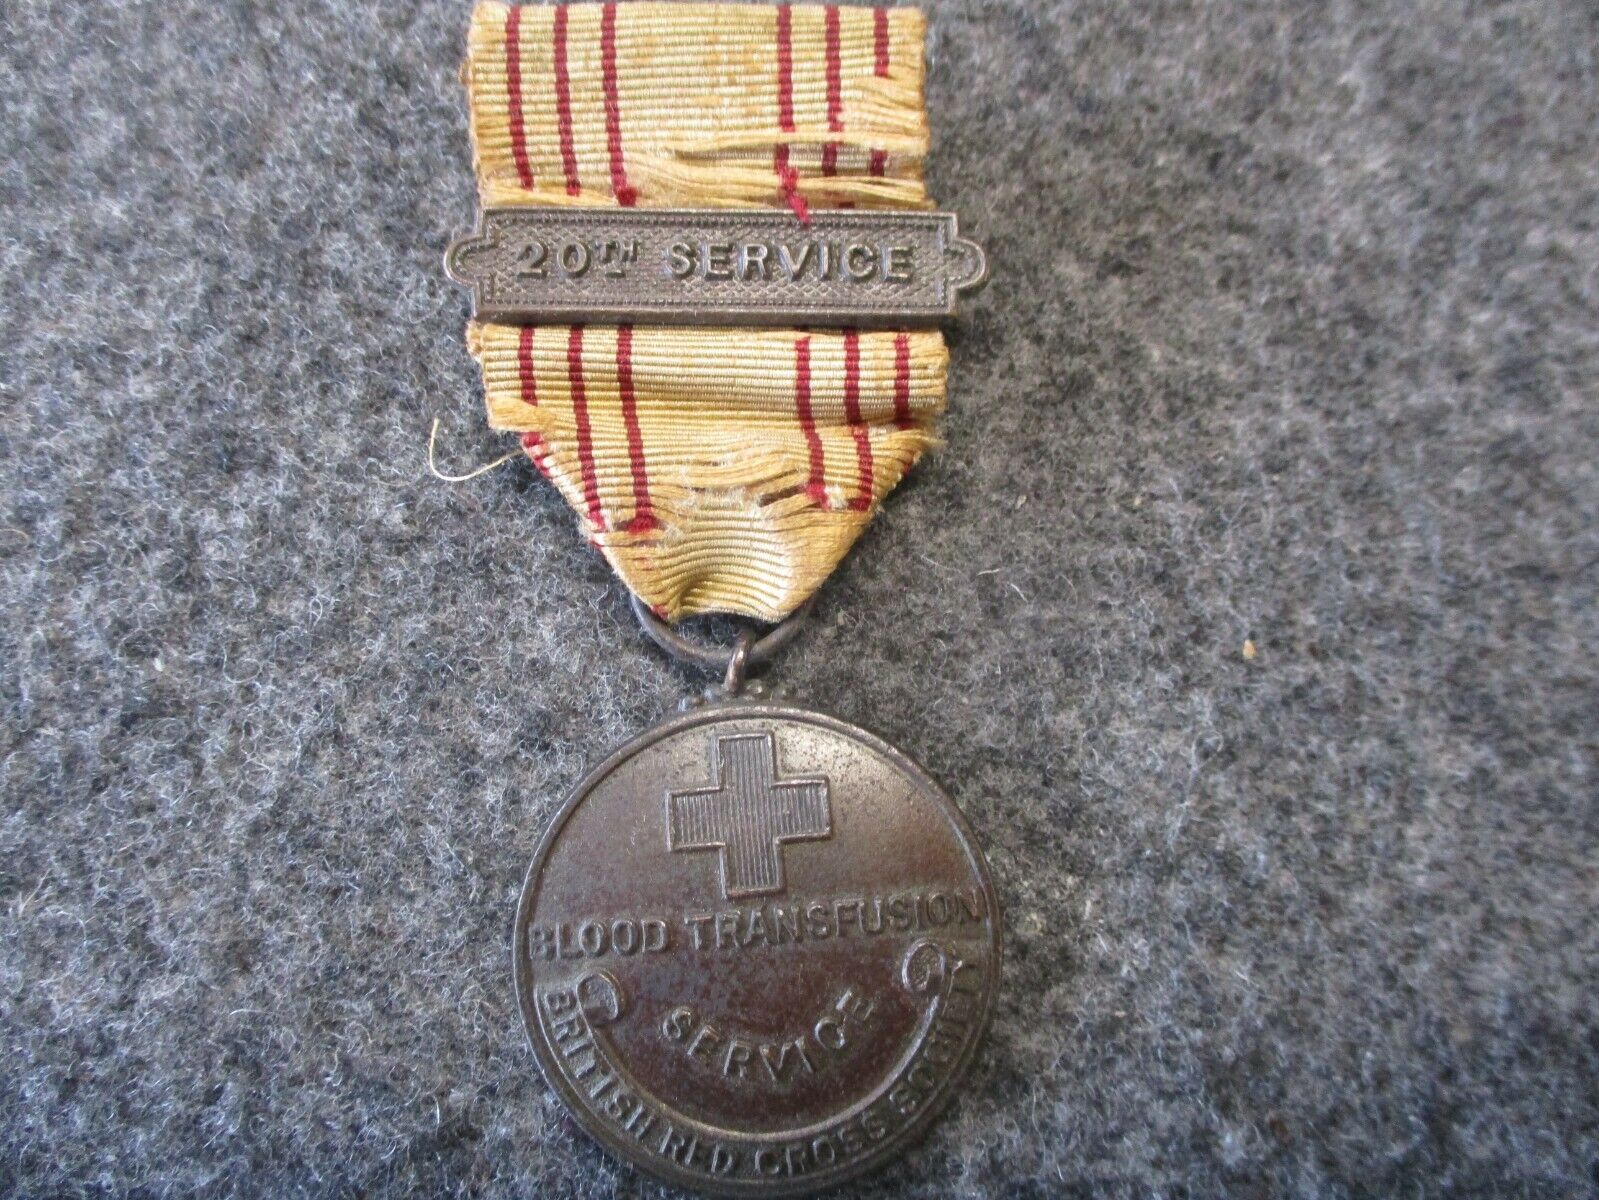 British Red Cross Blood Transfusion Medal With 20th Service Bar Engraved